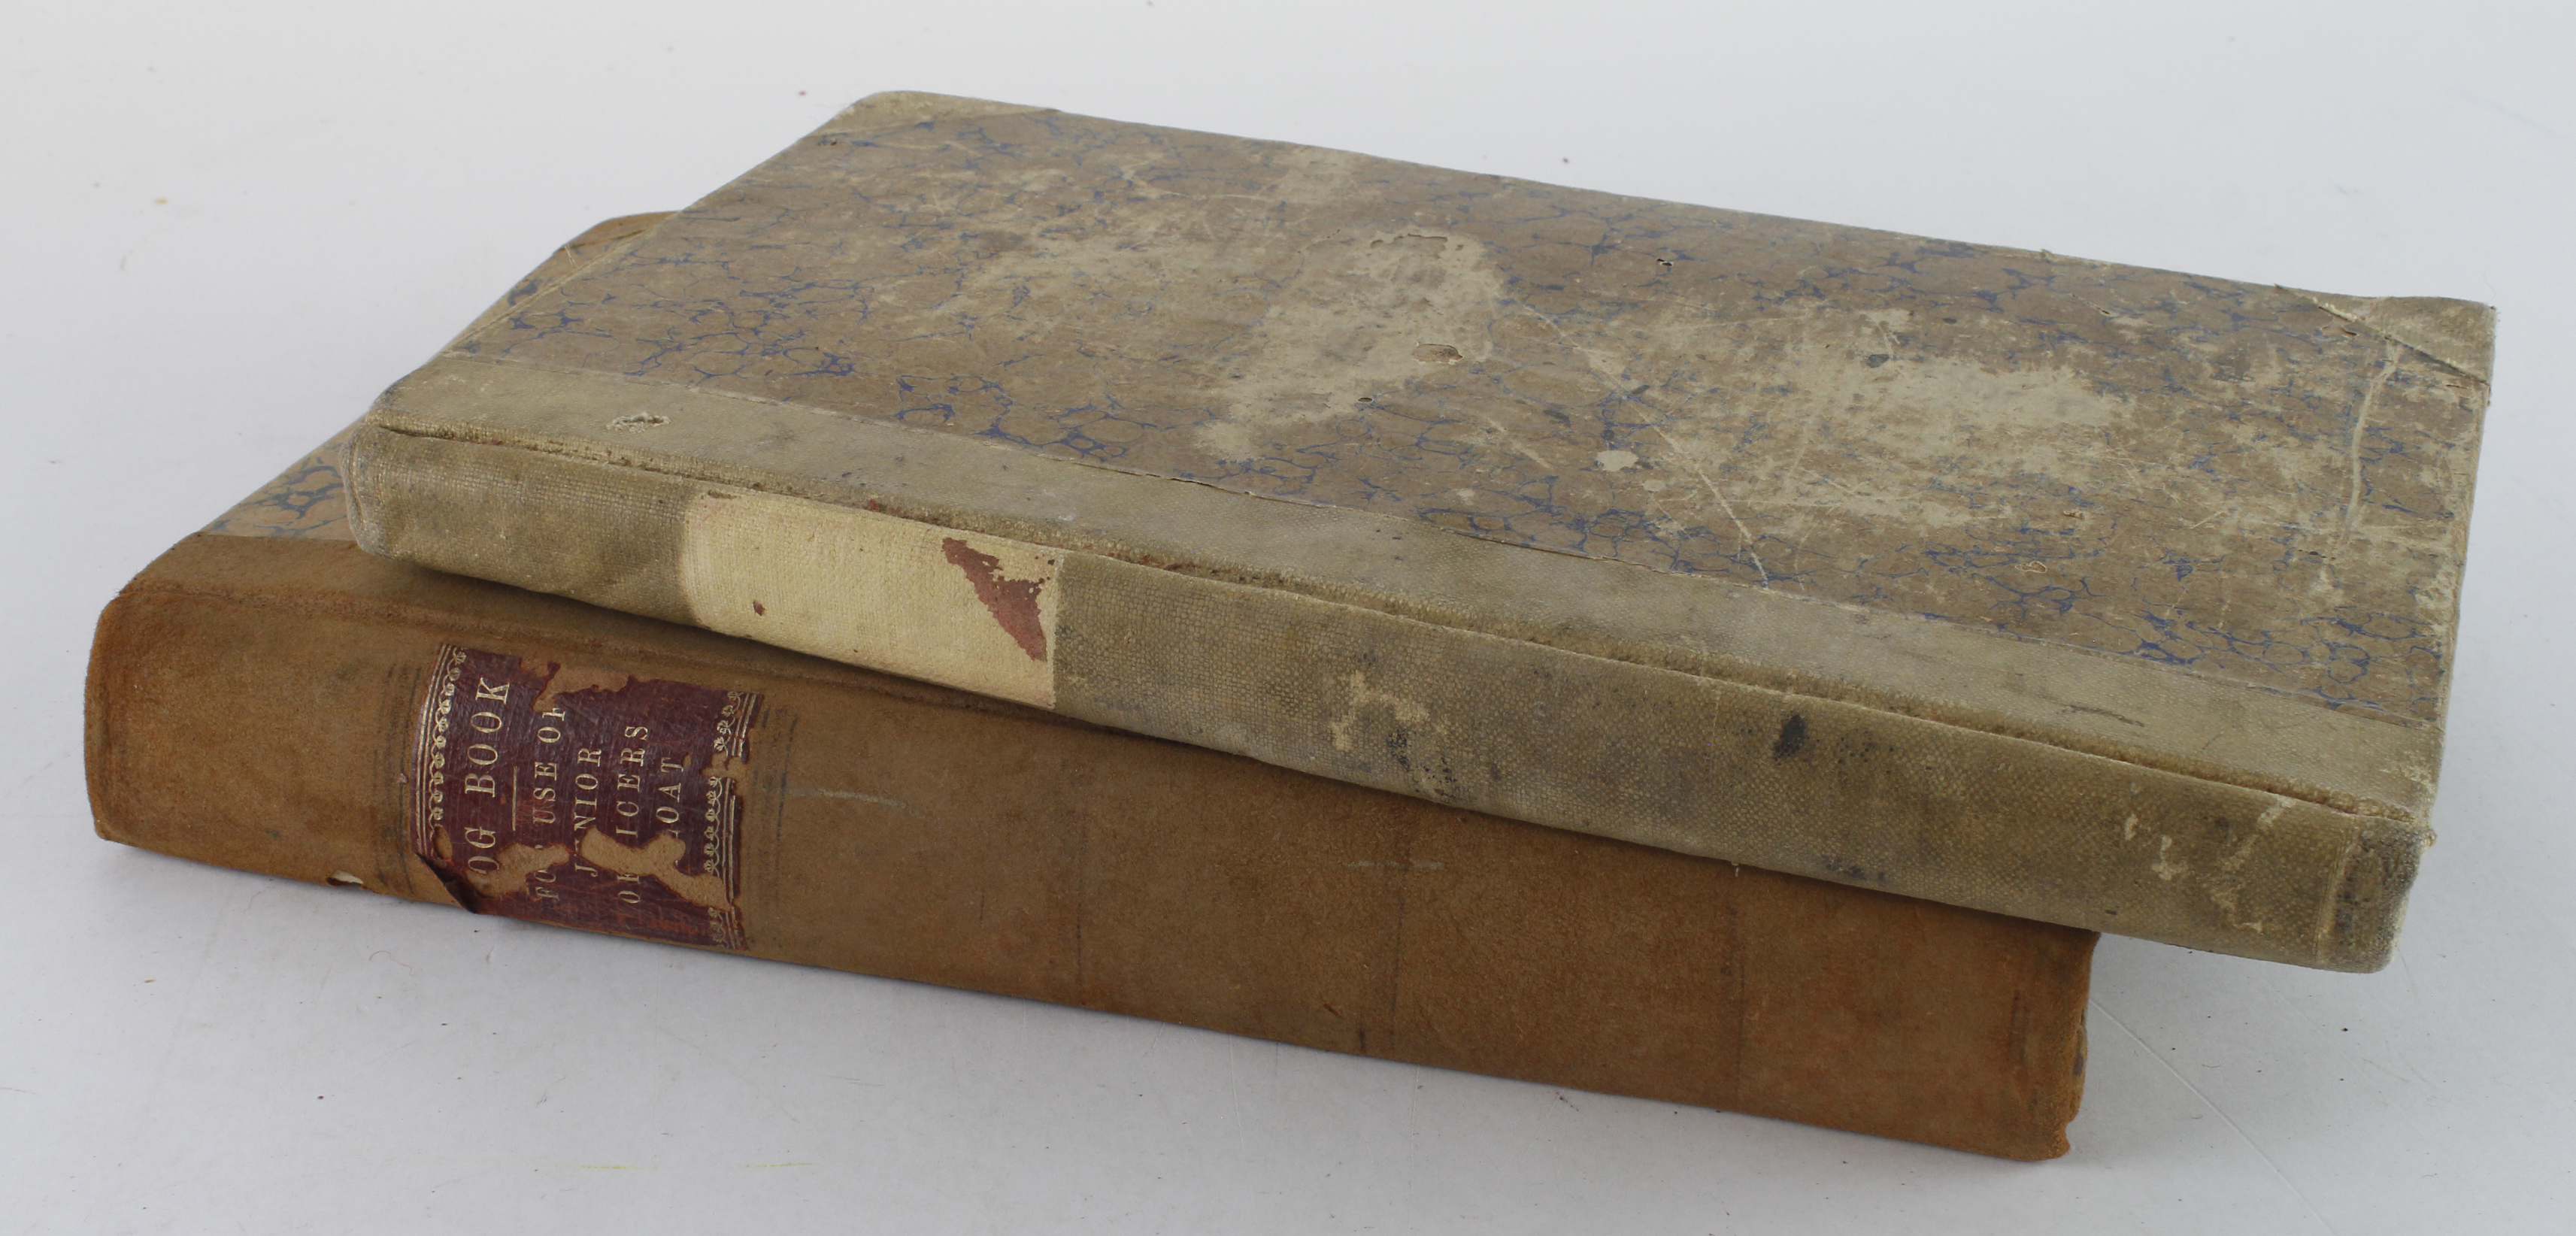 Naval interest. Two naval log books, relating to the service of W. D. De Courcy, Ireland, circa